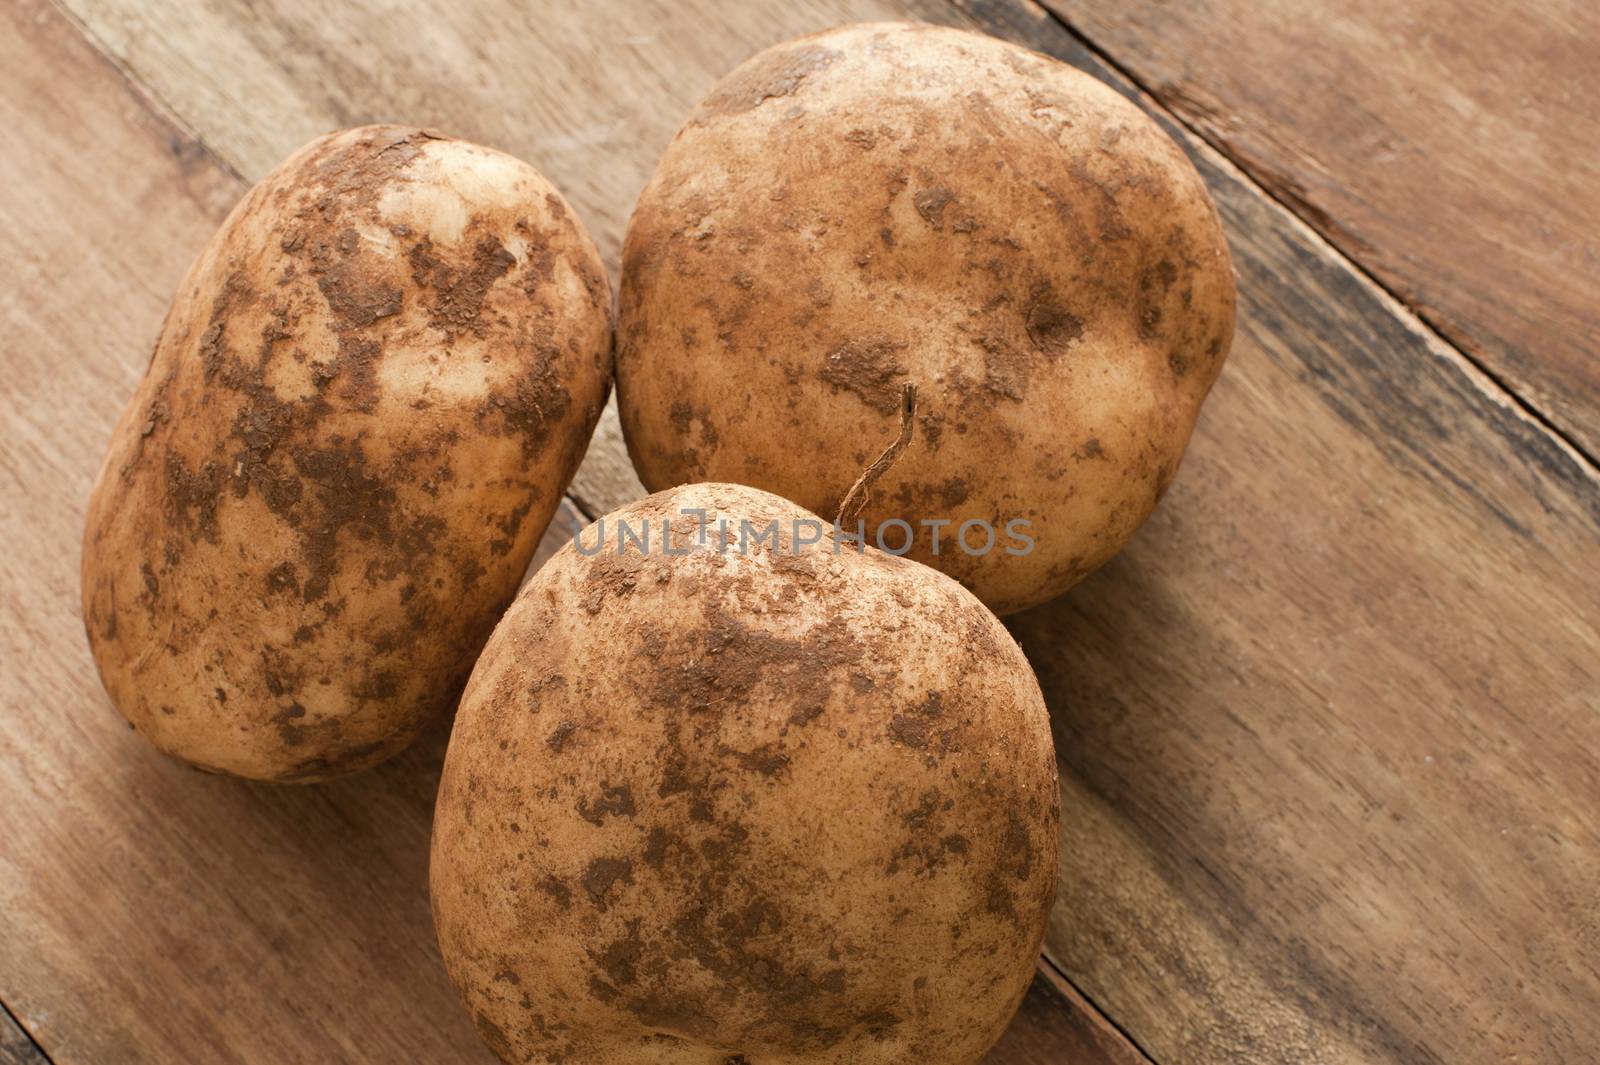 Close up view of three unwashed fresh farm potatoes with clinging soil on a rustic wooden table for a healthy nutritious vegetable accompaniment to a meal